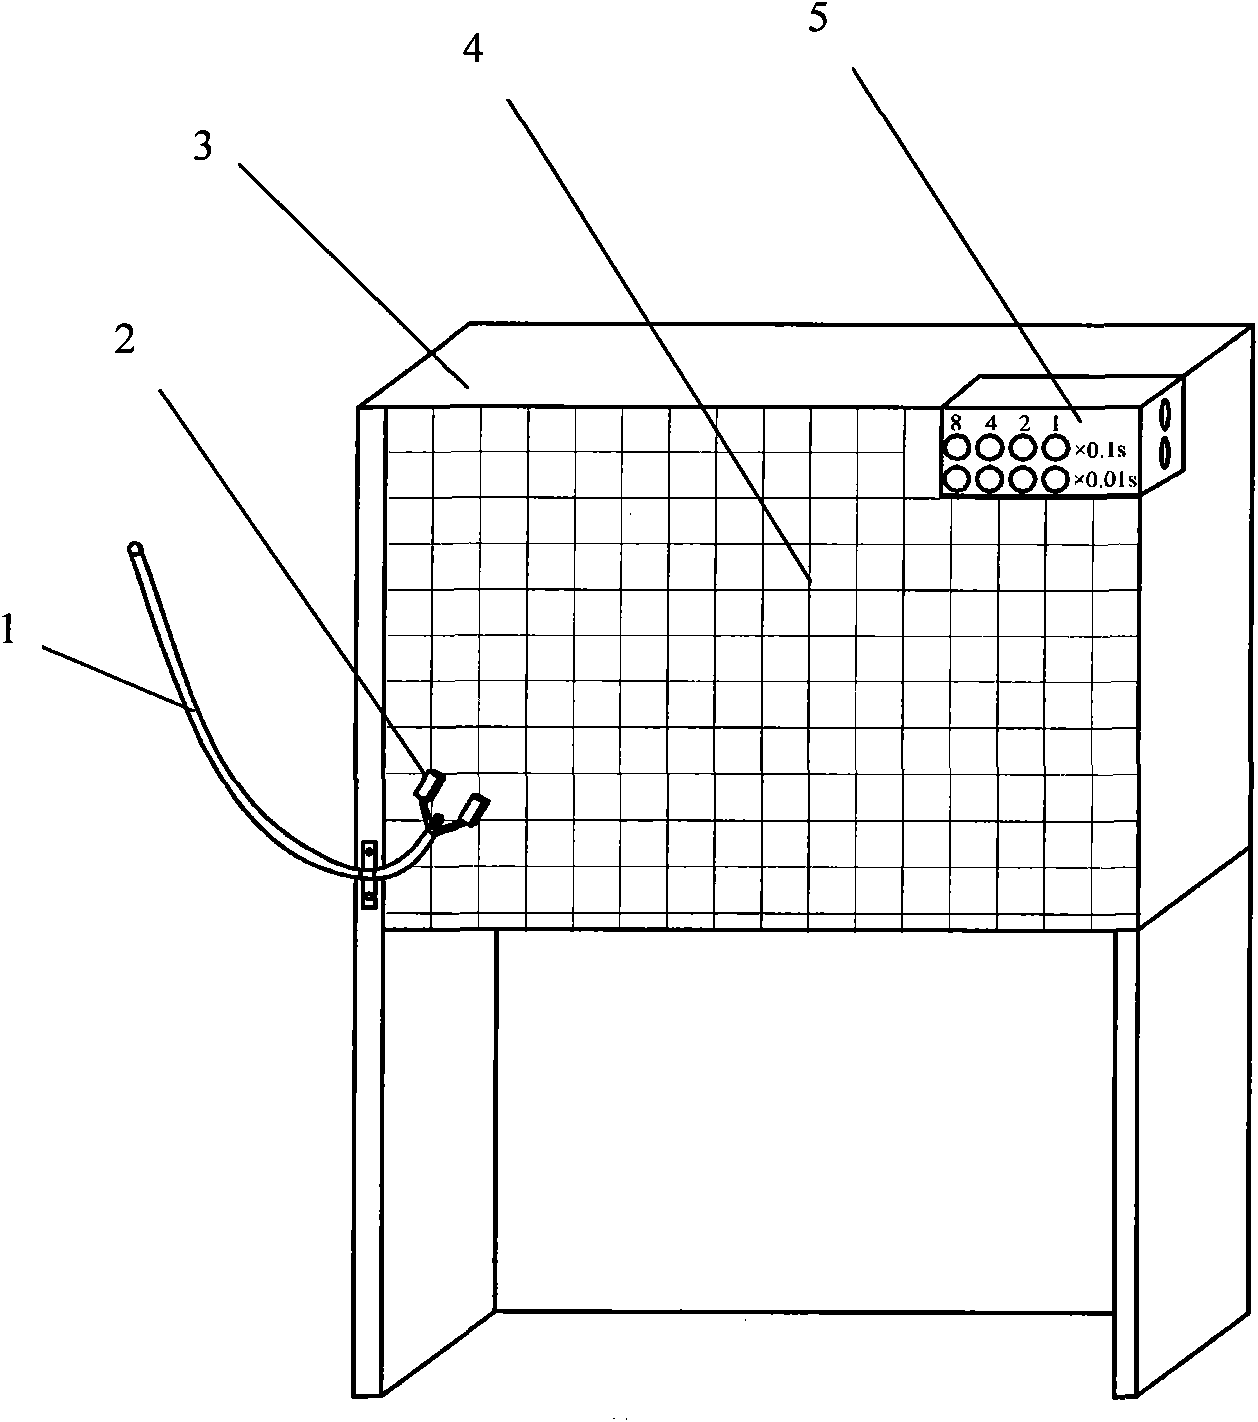 Experimental device for projectile motion study capable of displaying time in real time